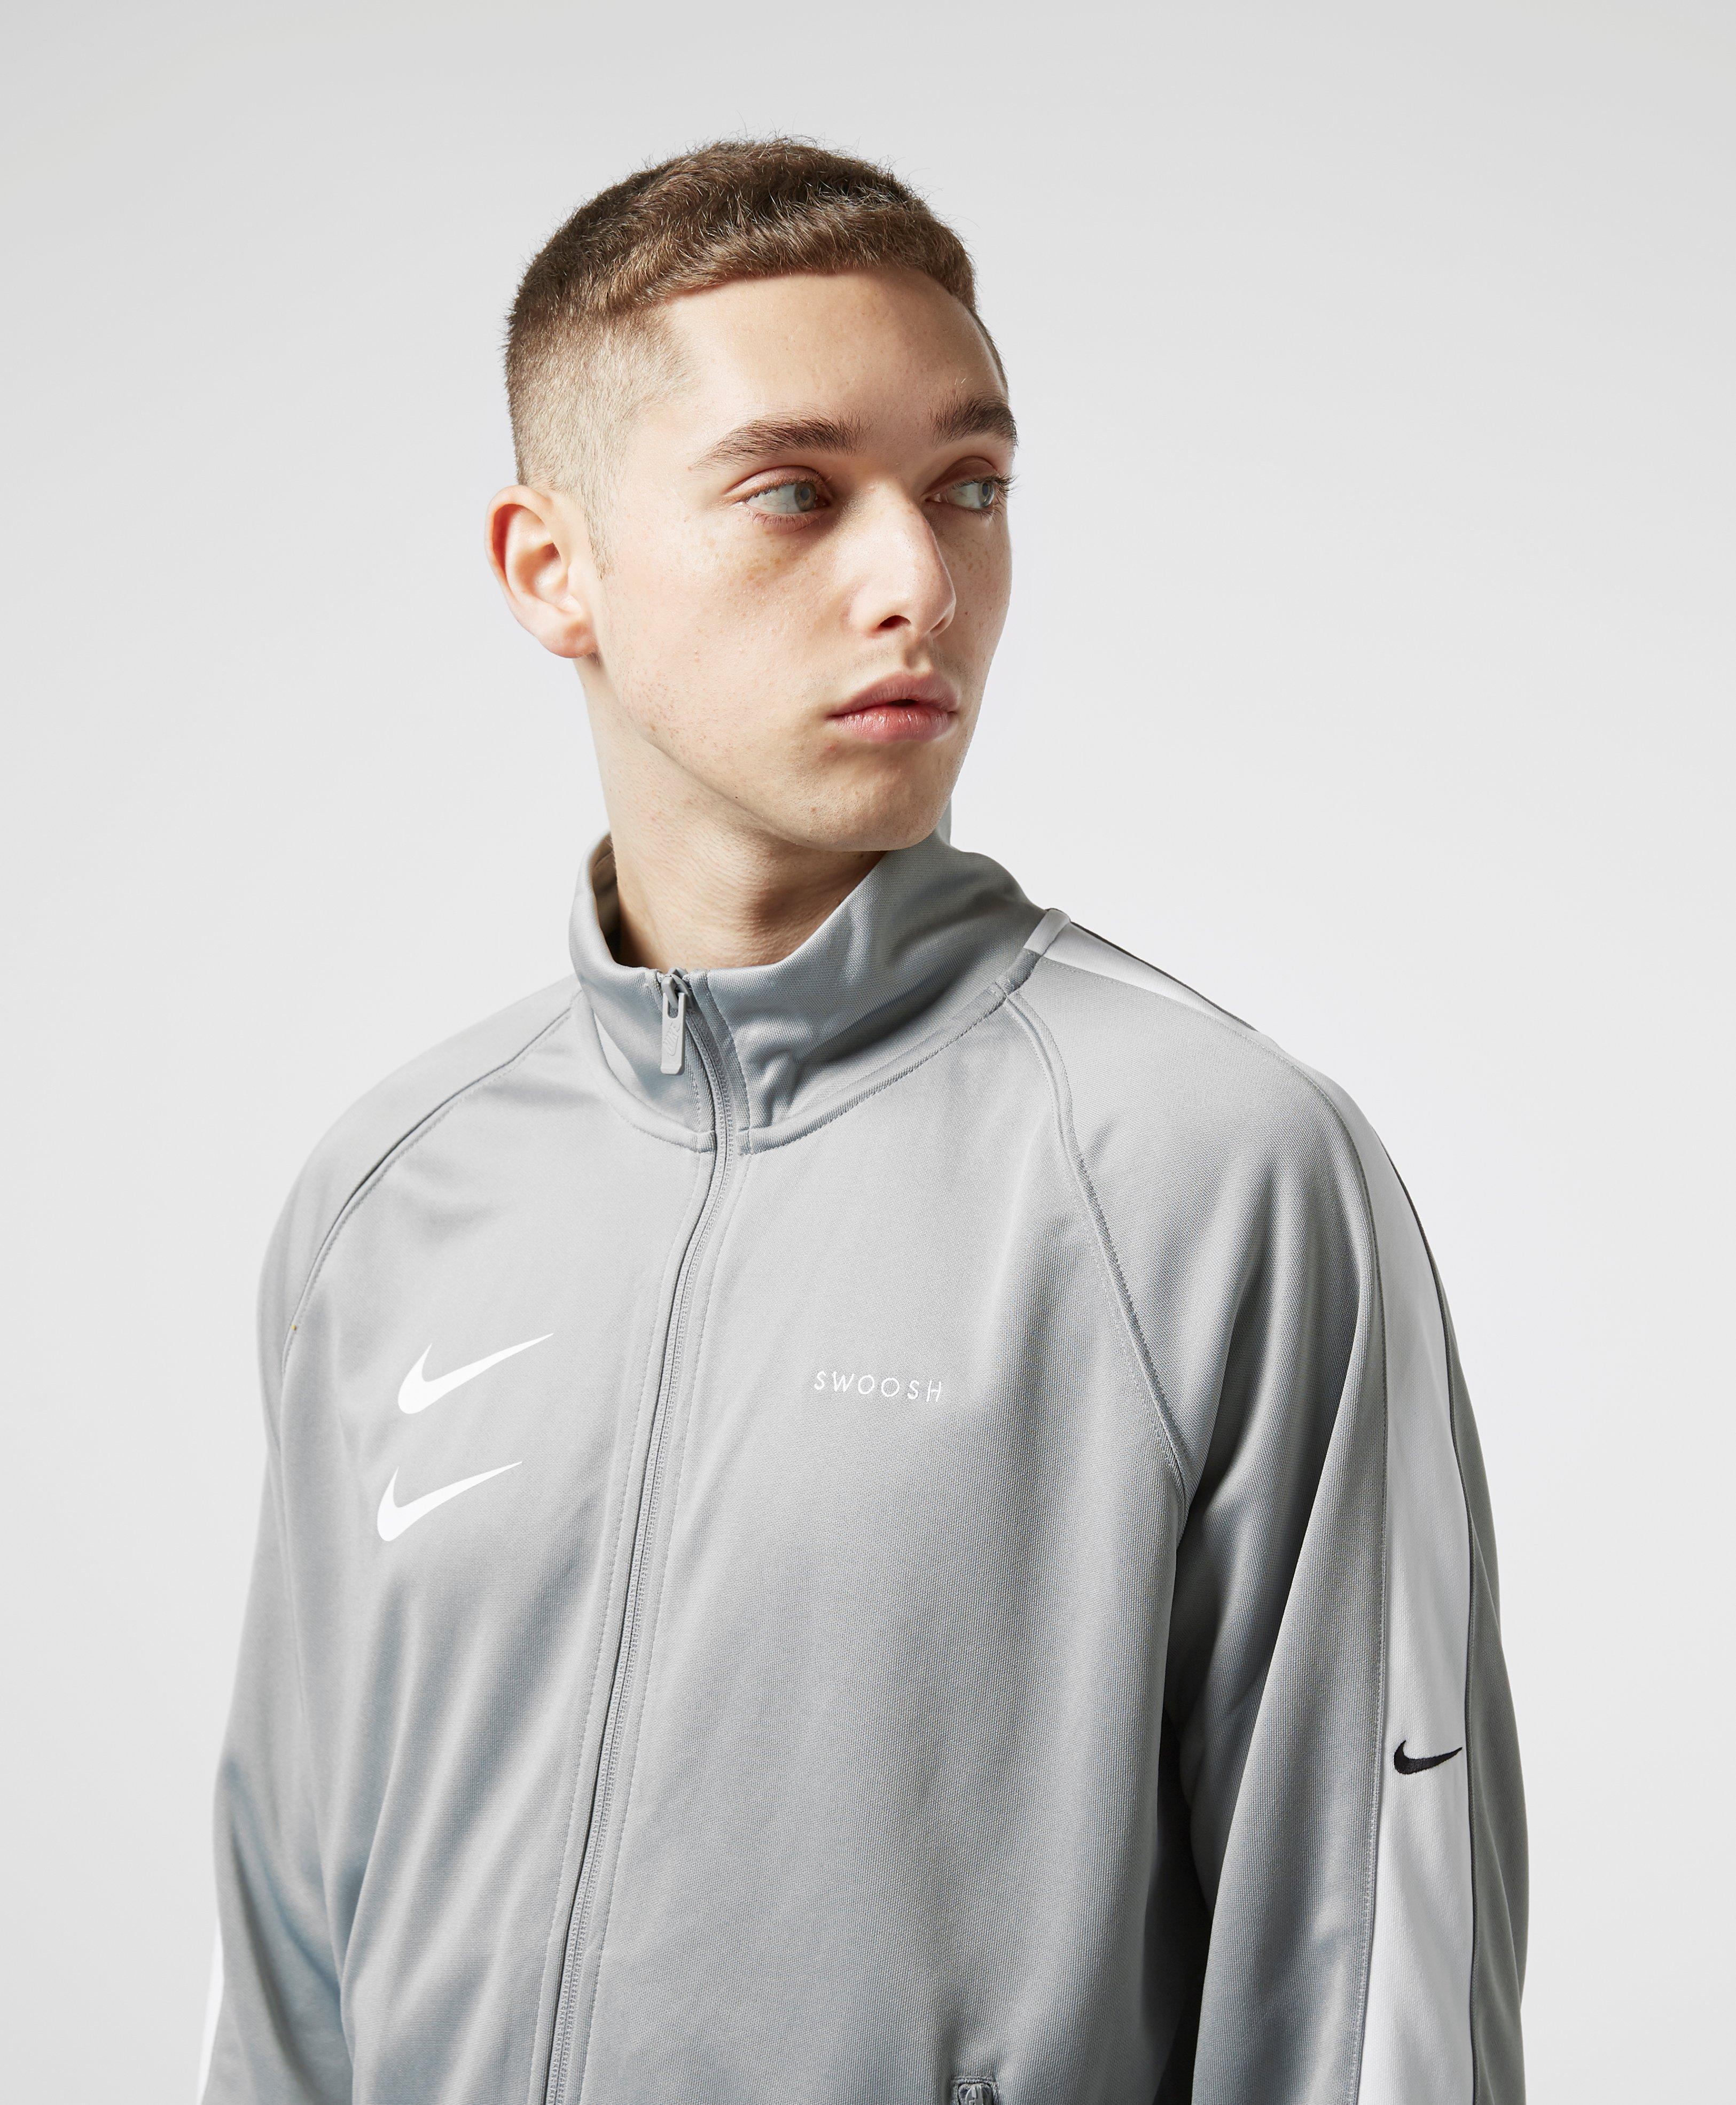 Nike Synthetic Double Swoosh Track Top in Grey (Gray) for Men - Lyst